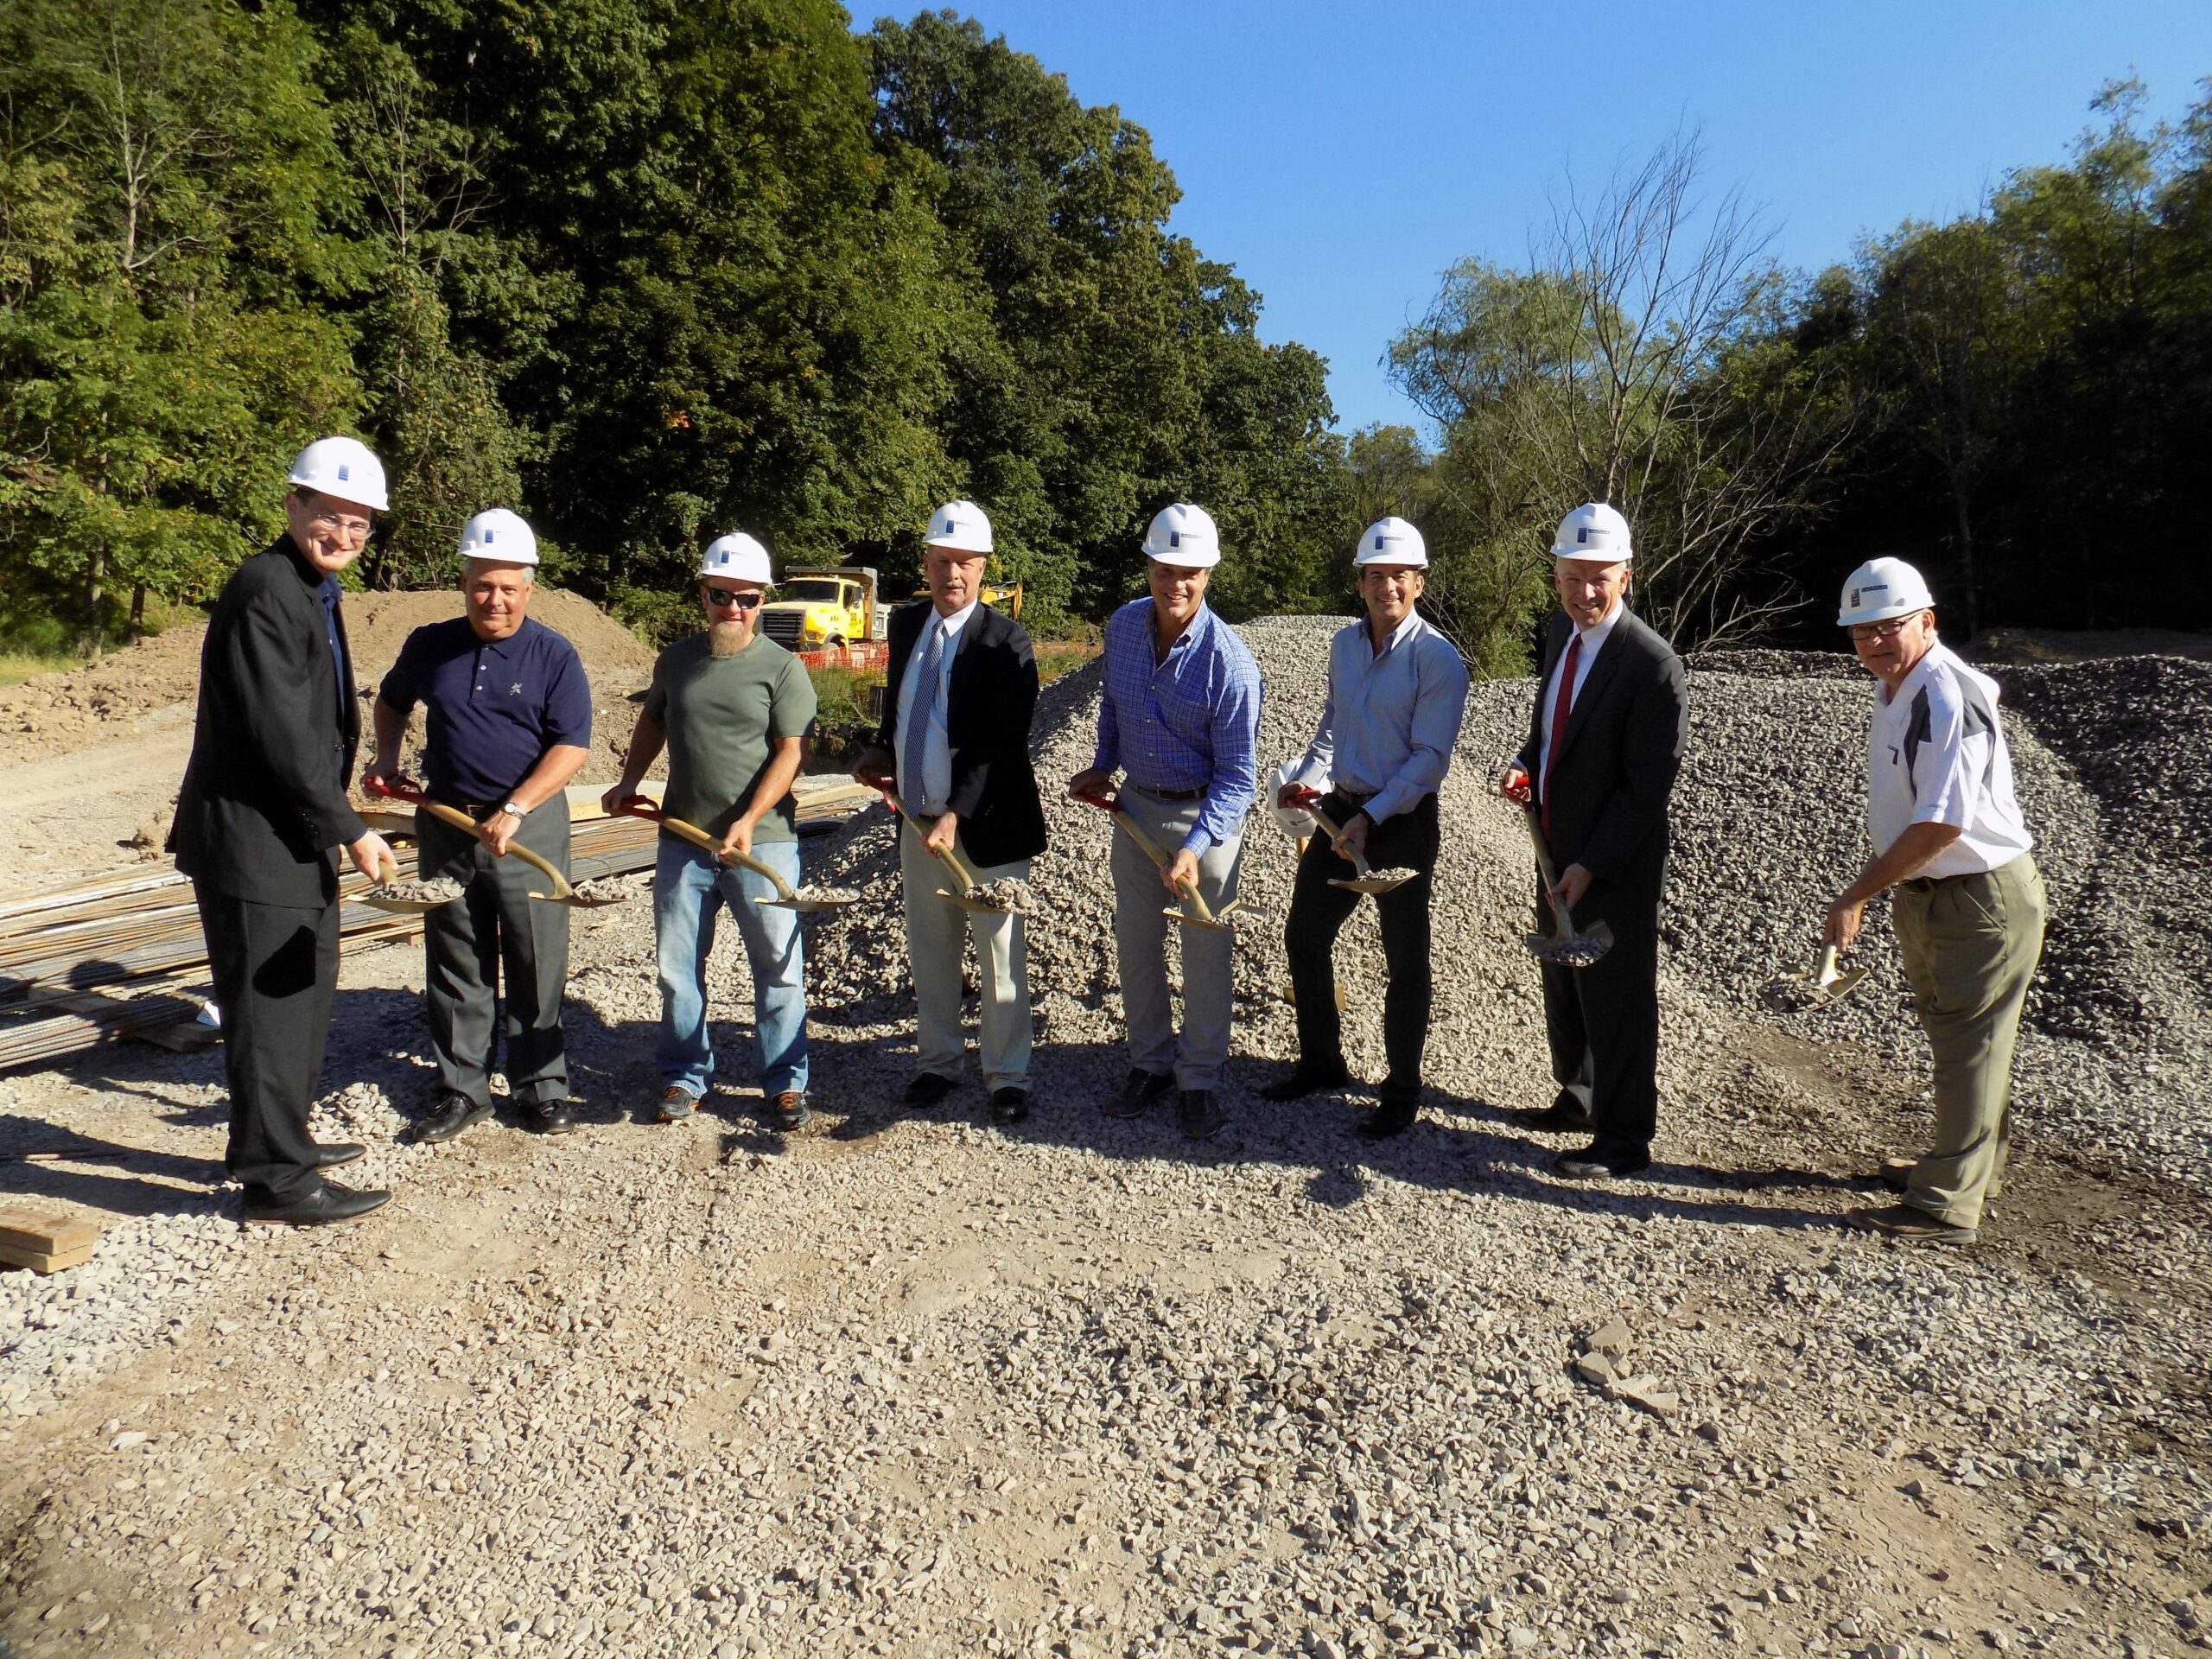 Monroeville Rt. 22 Ground Breaking Ceremony Participants